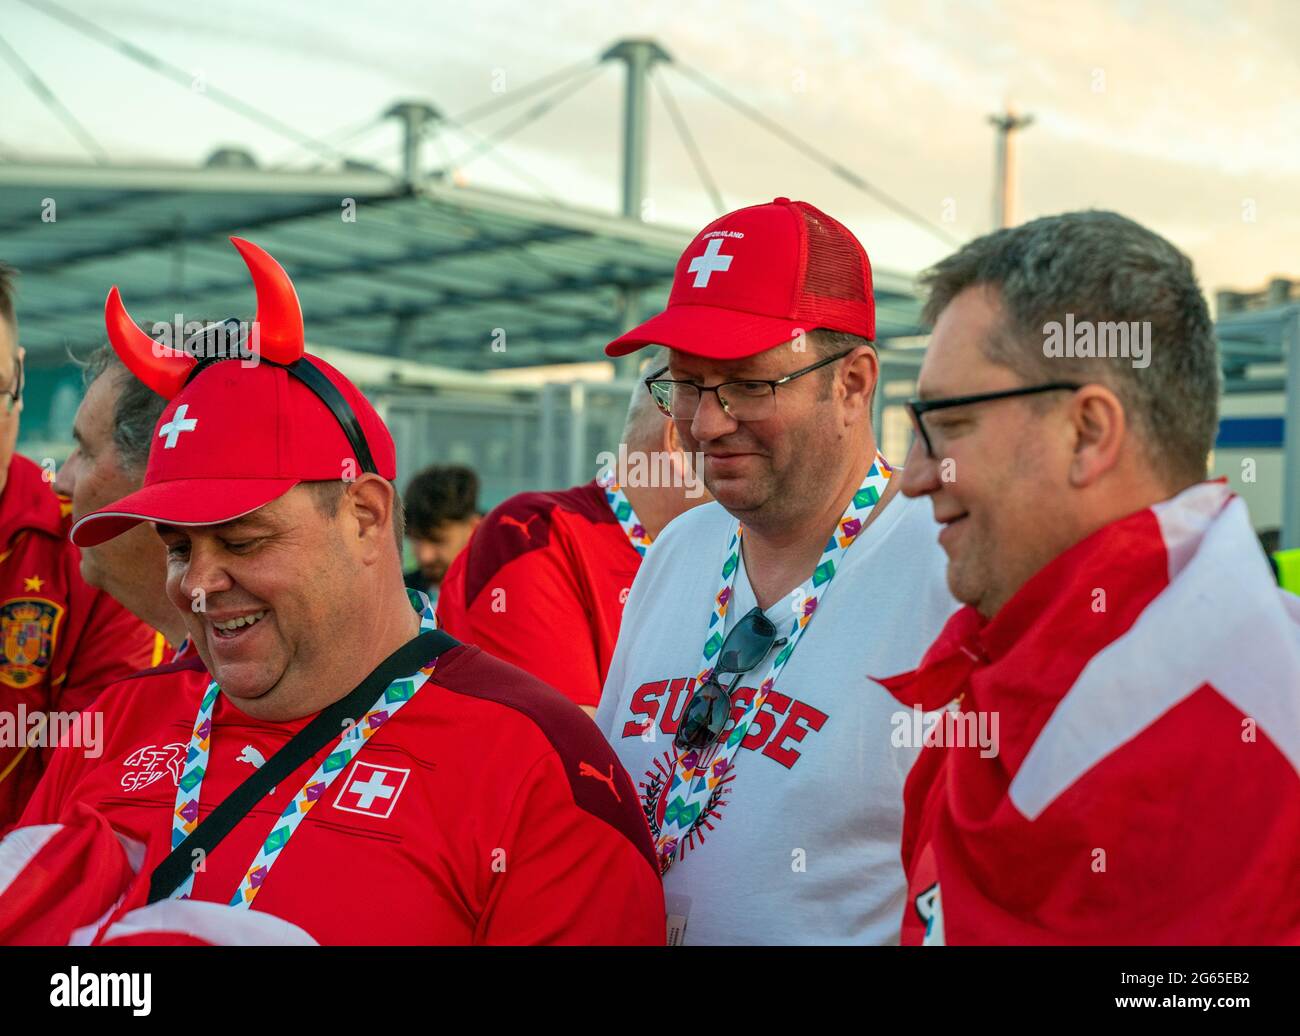 Swiss football fans dressed in colorful Suisse outfits, horned cap, after  UEFA EURO 2020 quarterfinal game Switzerland-Spain, St Petersburg, Russia  Stock Photo - Alamy